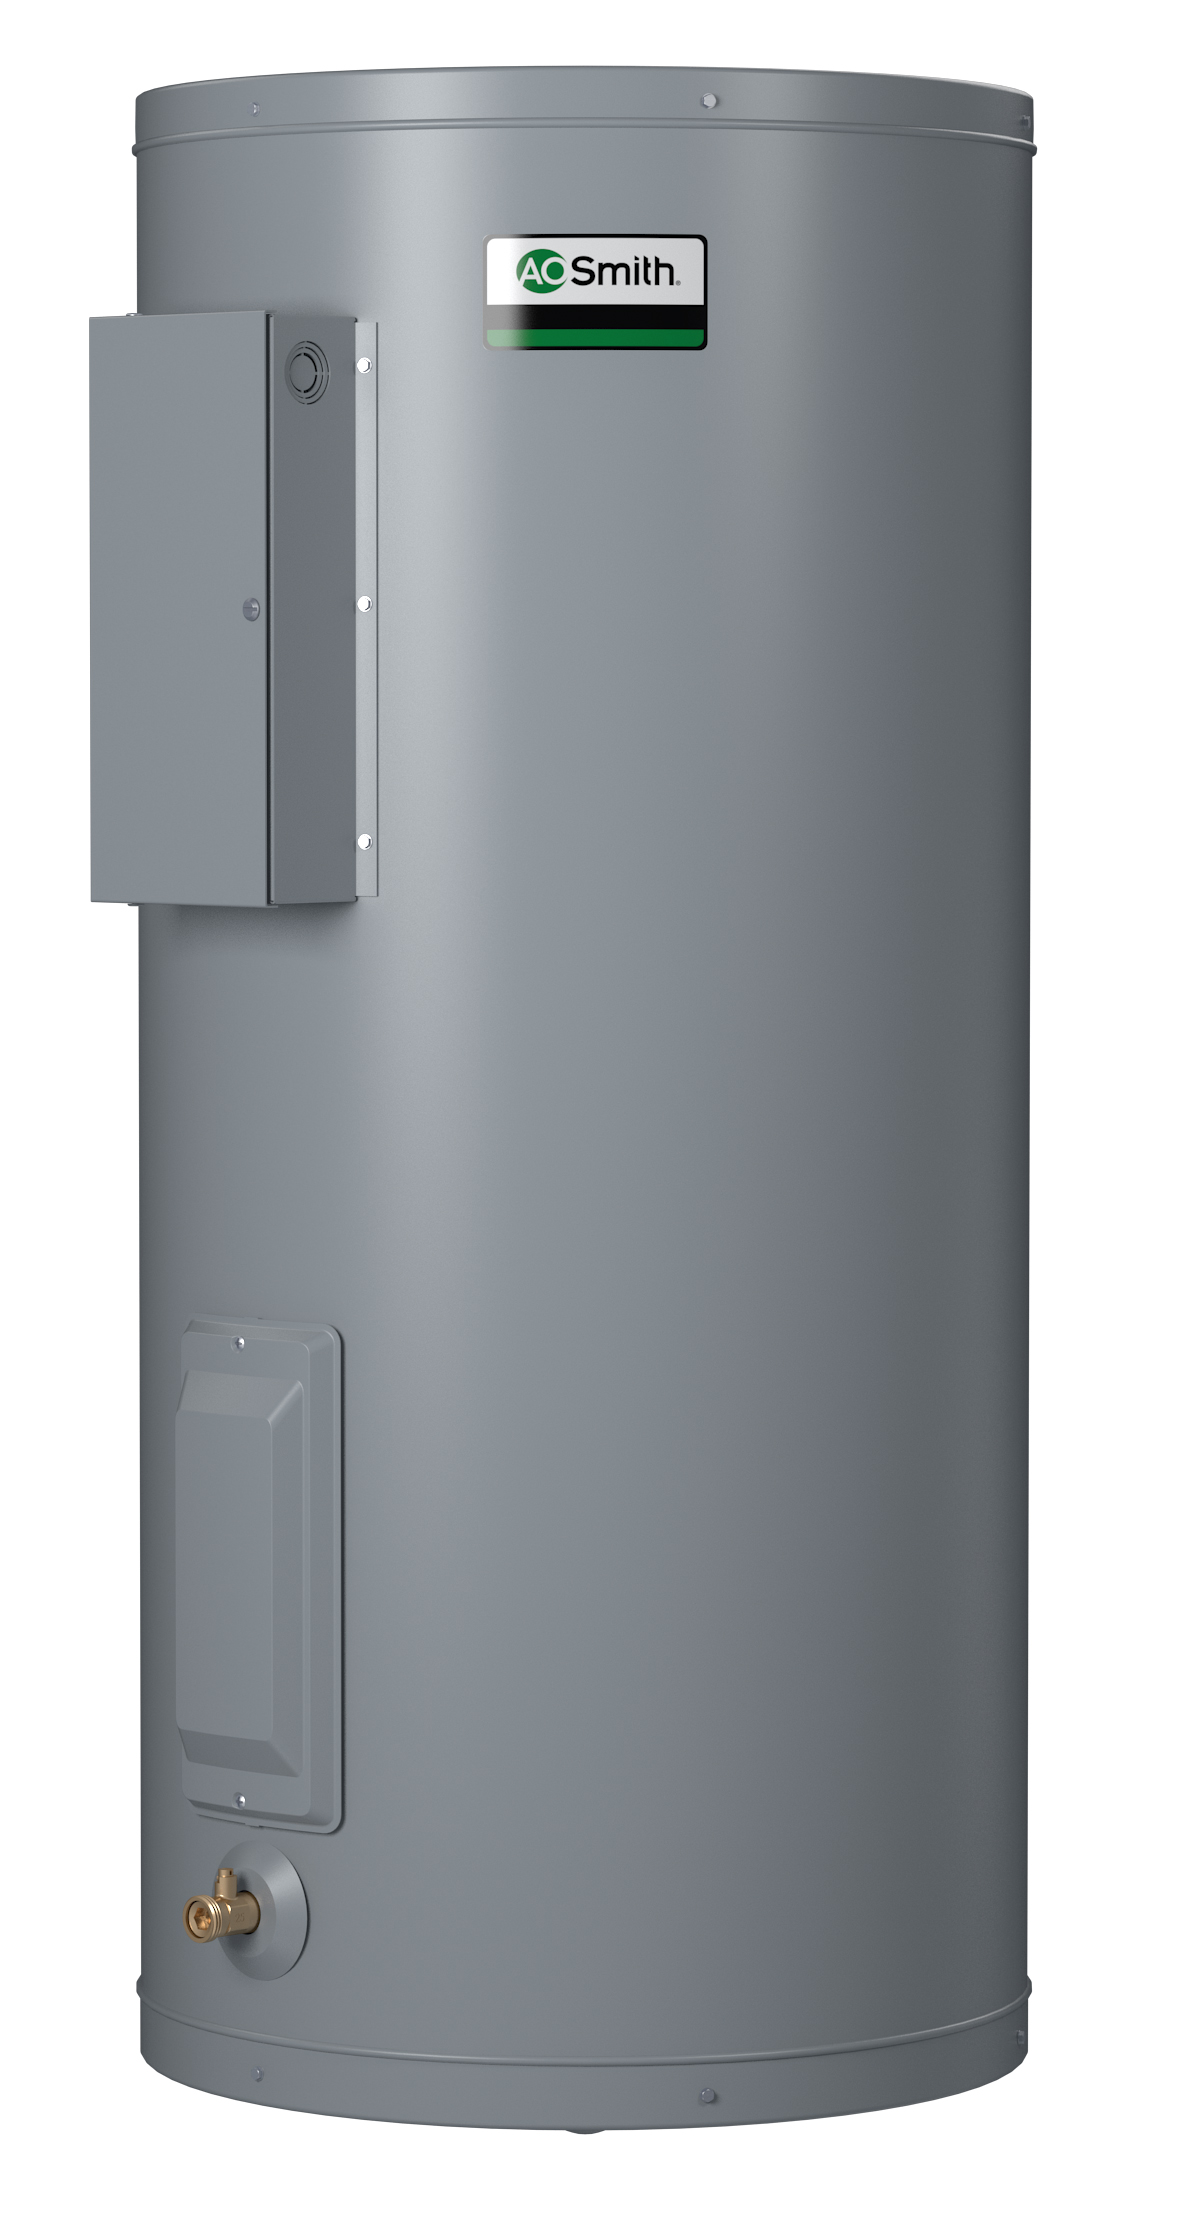 AO SMITH DEN-120D: 120 GALLONS, 2.5 KW, 240 VOLT, 1 PHASE, (2-2500 WATT ELEMENTS, NON-SIMULTANEOUS WIRING), DURA-POWER, LIGHT DUTY COMMERCIAL ELECTRIC WATER HEATER